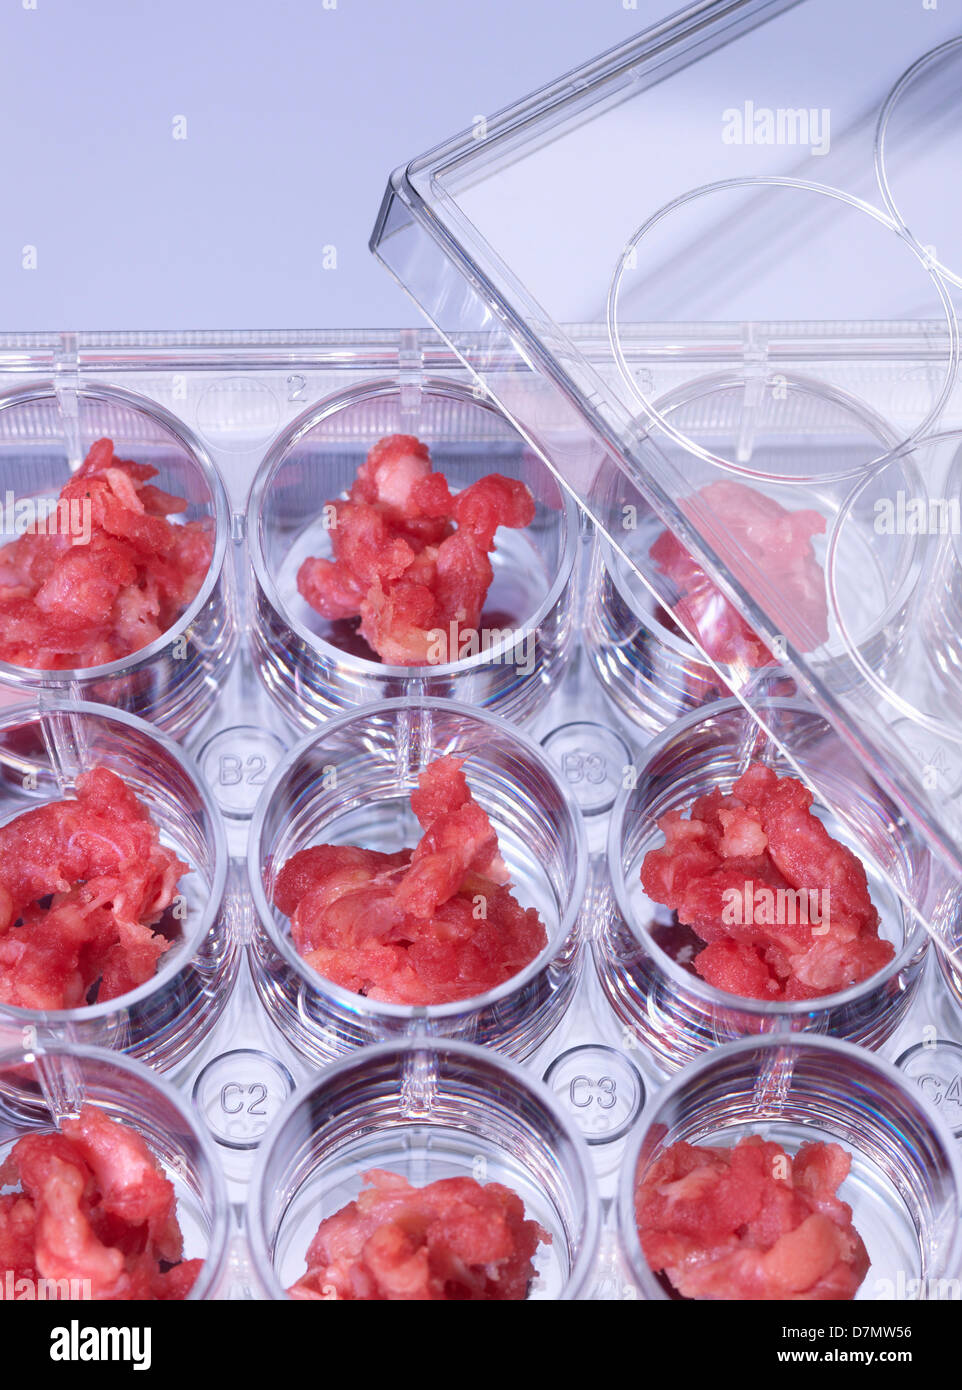 Genetic testing of meat, conceptual image Stock Photo